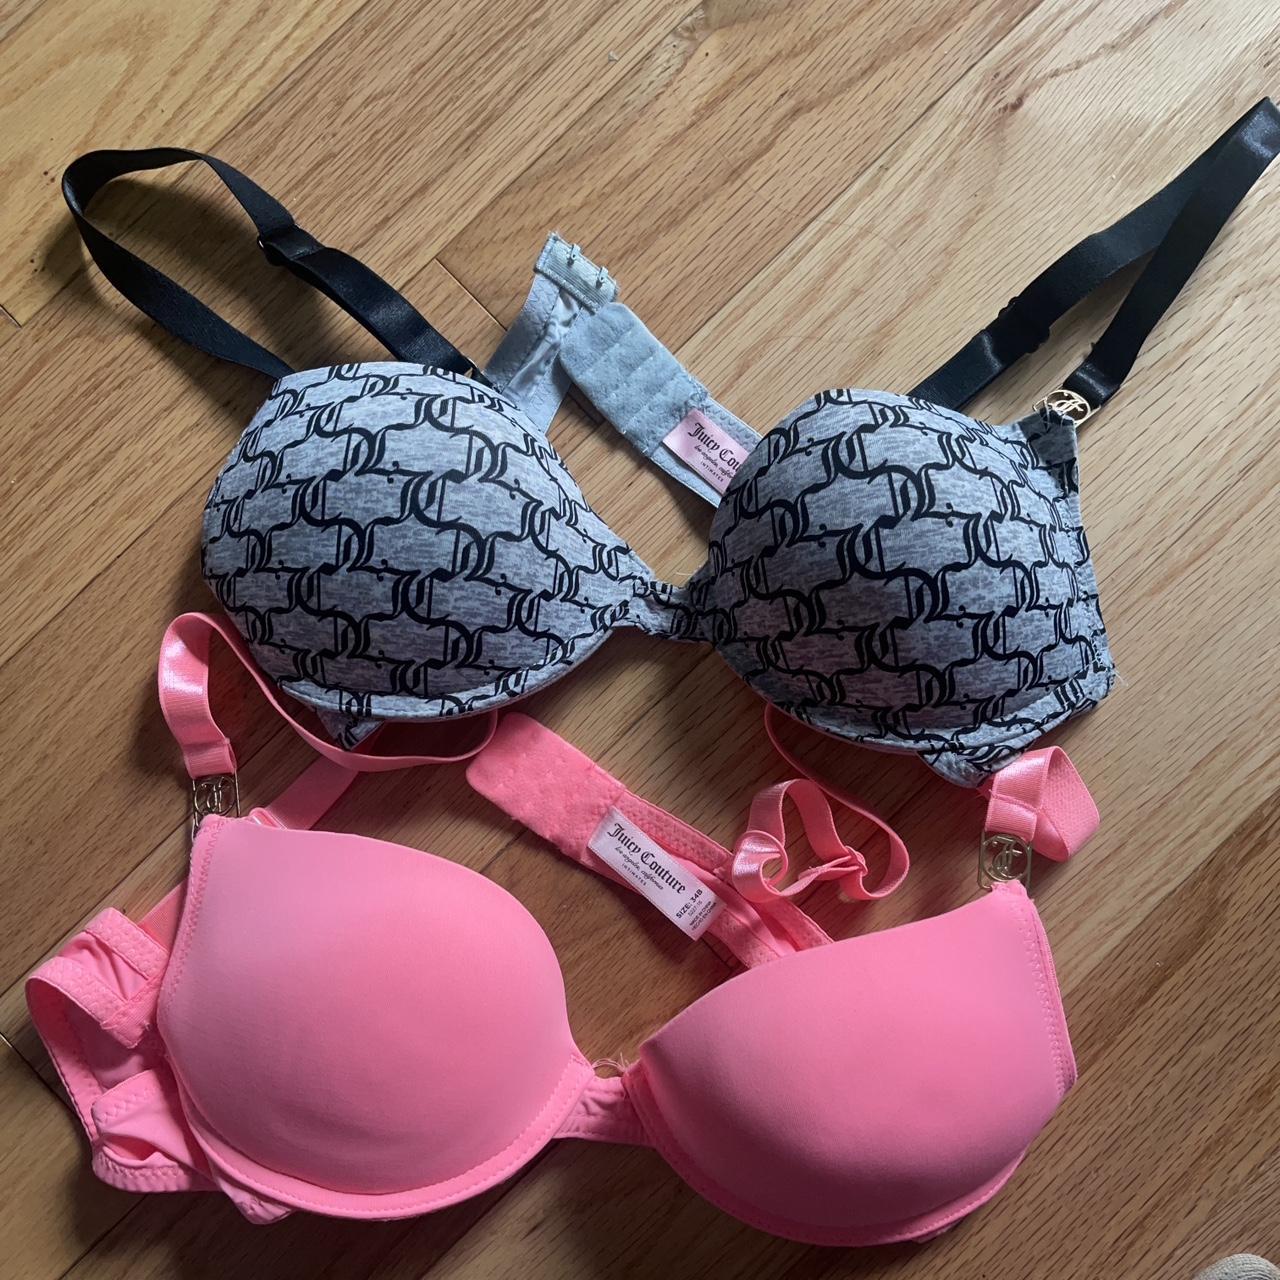 Juicy Couture Bra Strap Bras for Women